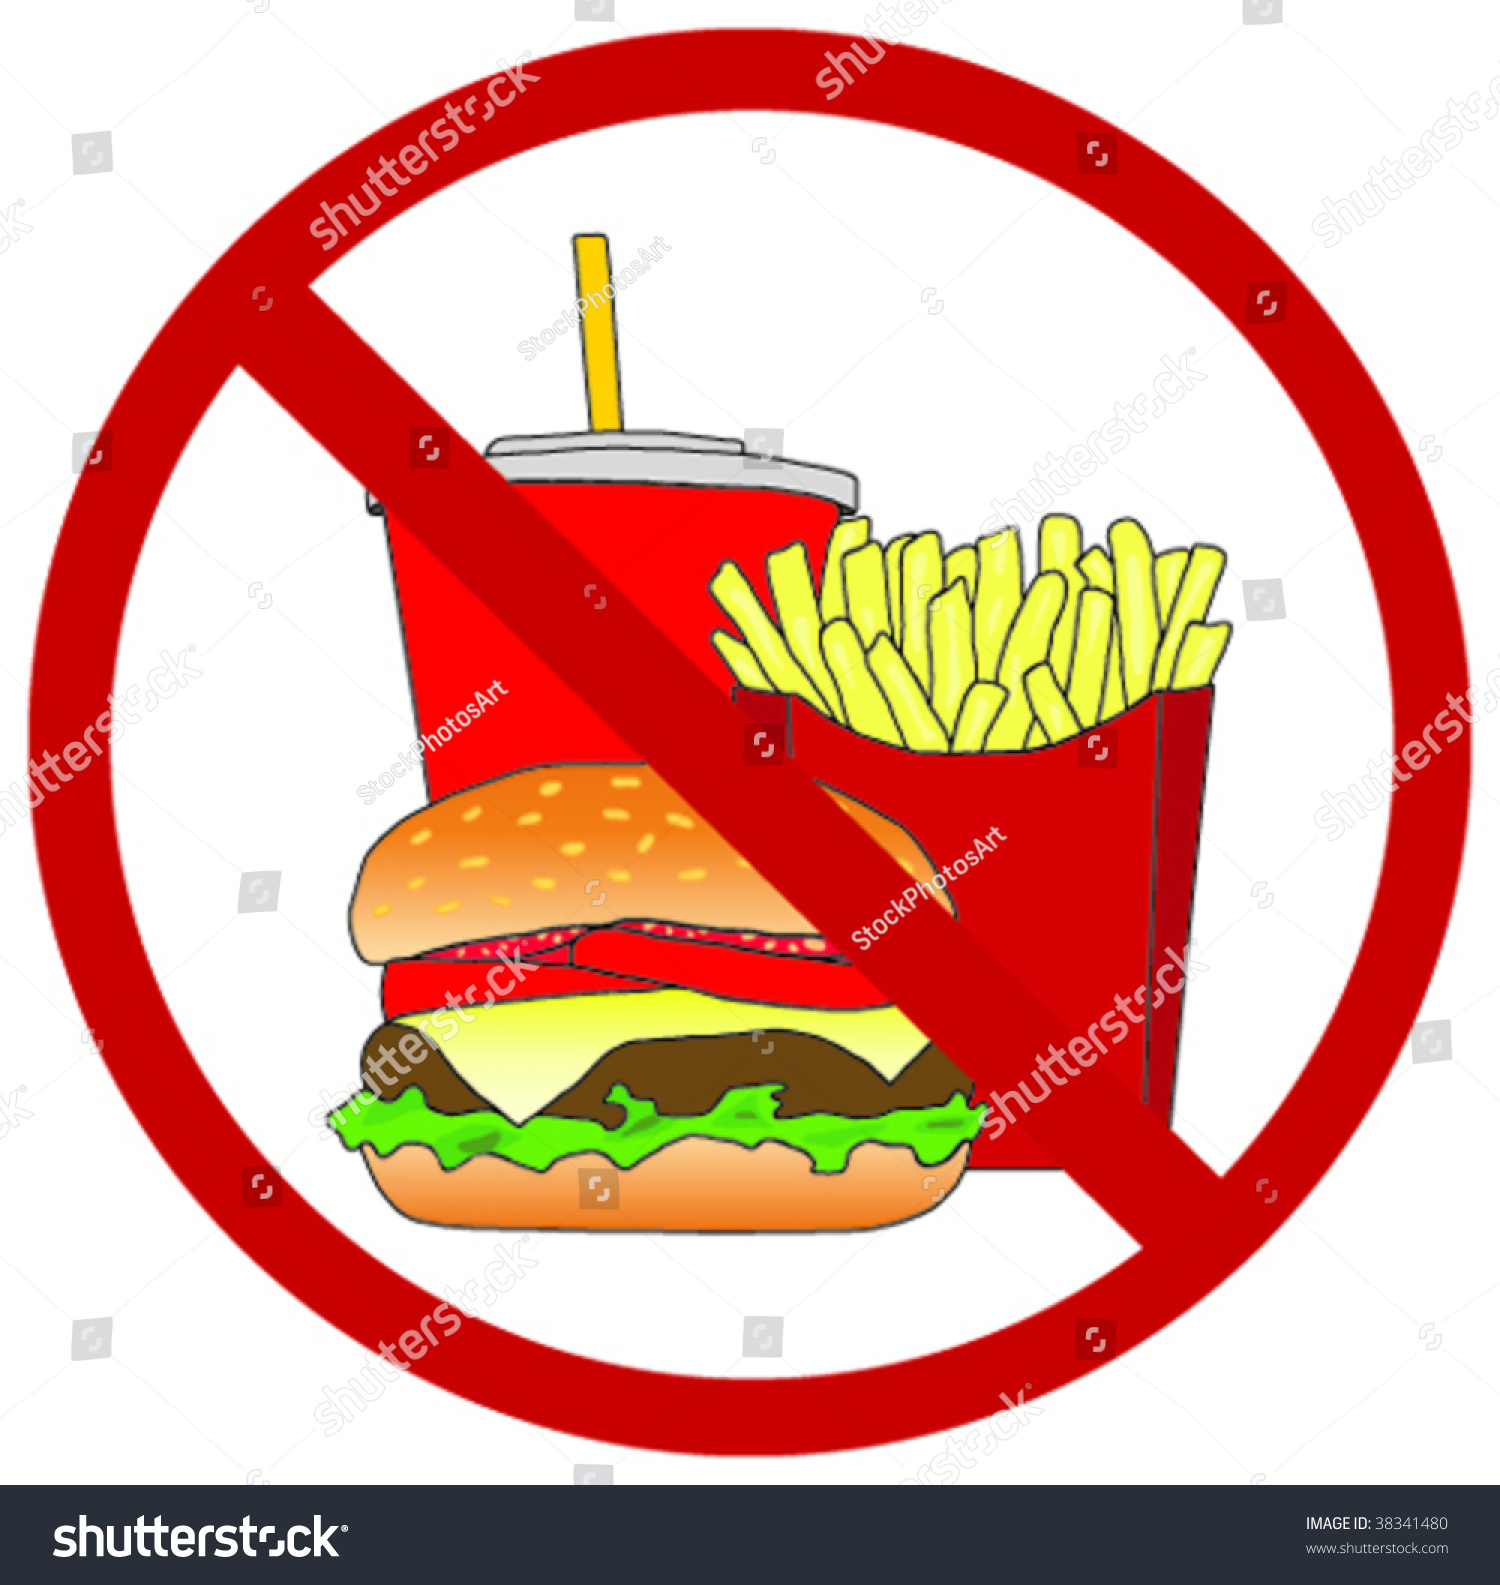 Prohibition Sign Over A Fast Food Meal With Hamburger, French Fries And ...